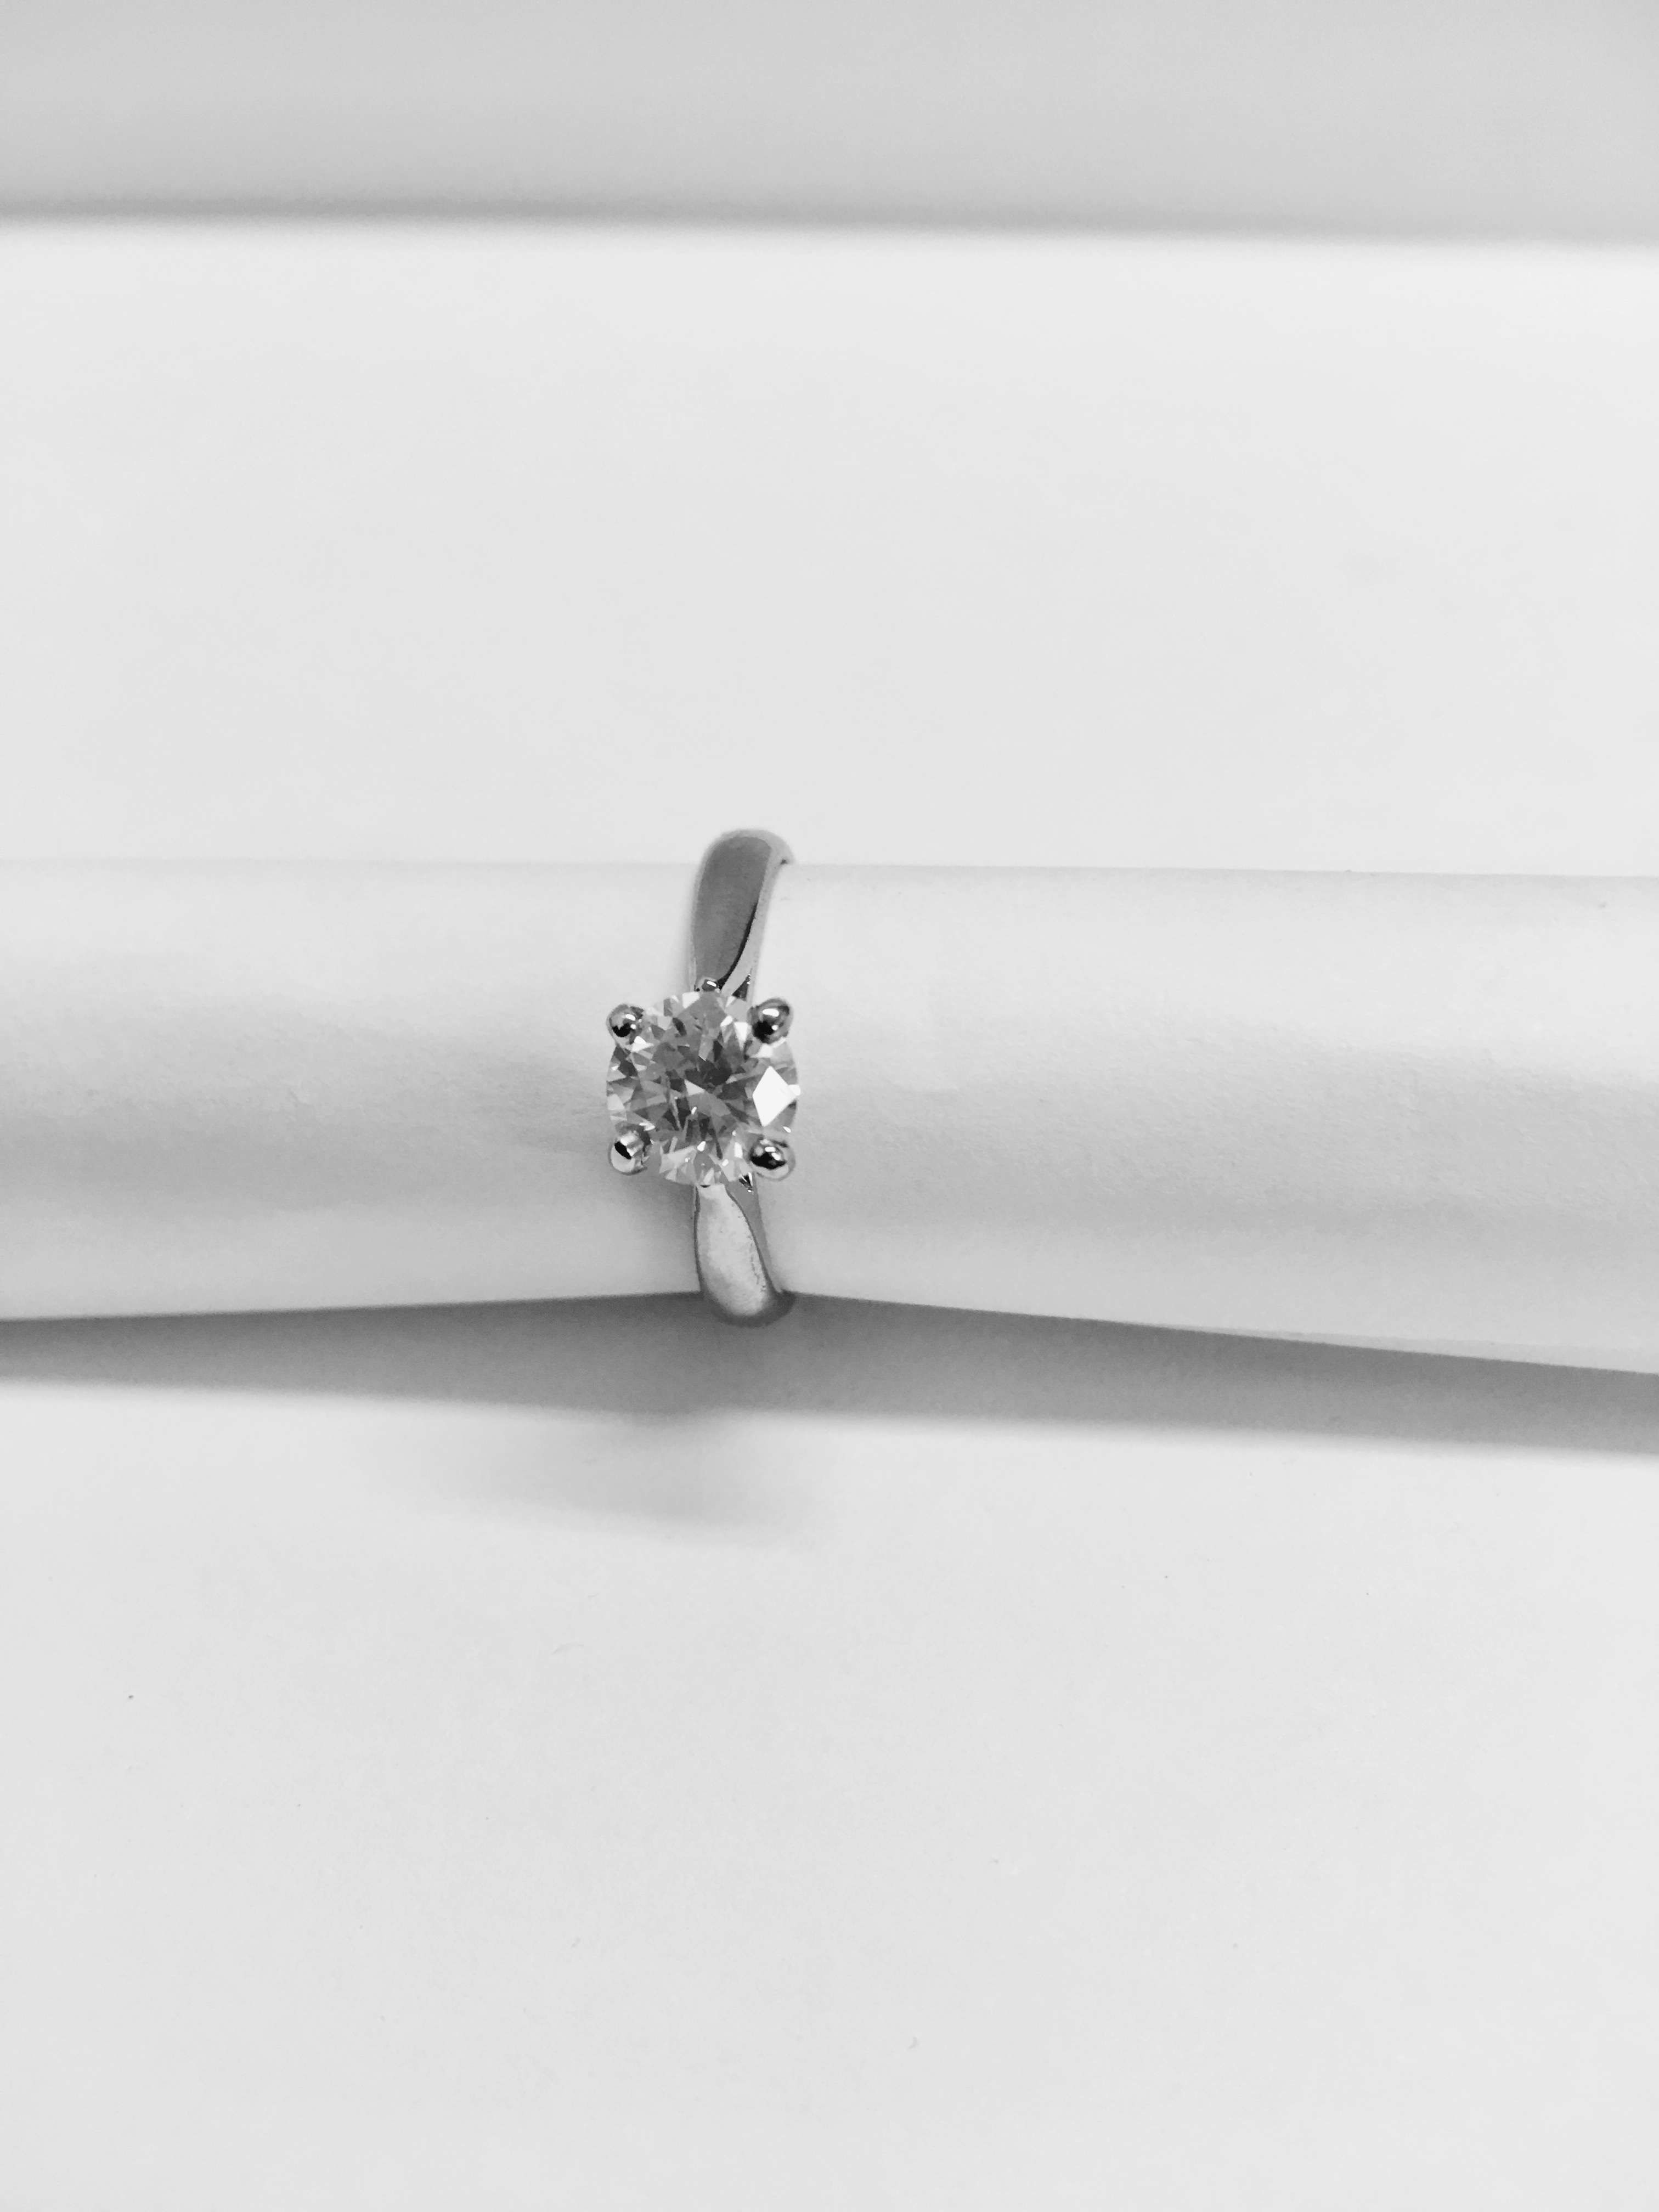 1.16ct diamond solitaire ring with a brilliant cut diamond - Image 5 of 5